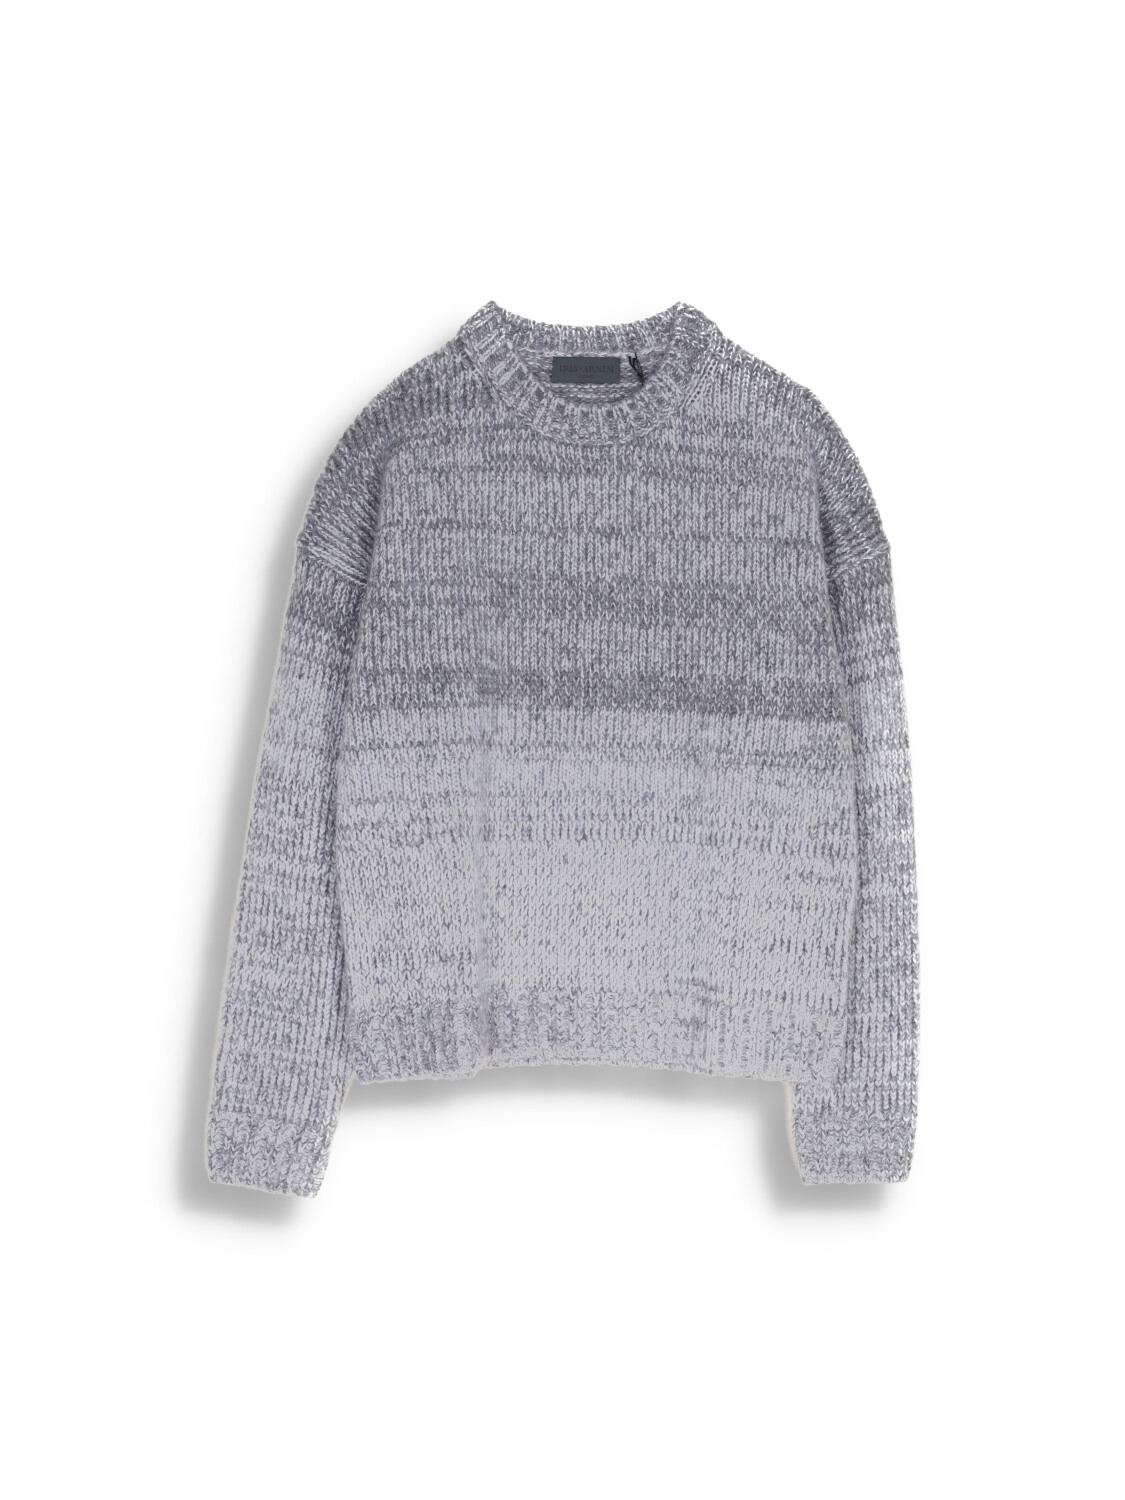 Gino Degrade - Gradient sweater made of cashmere and silk